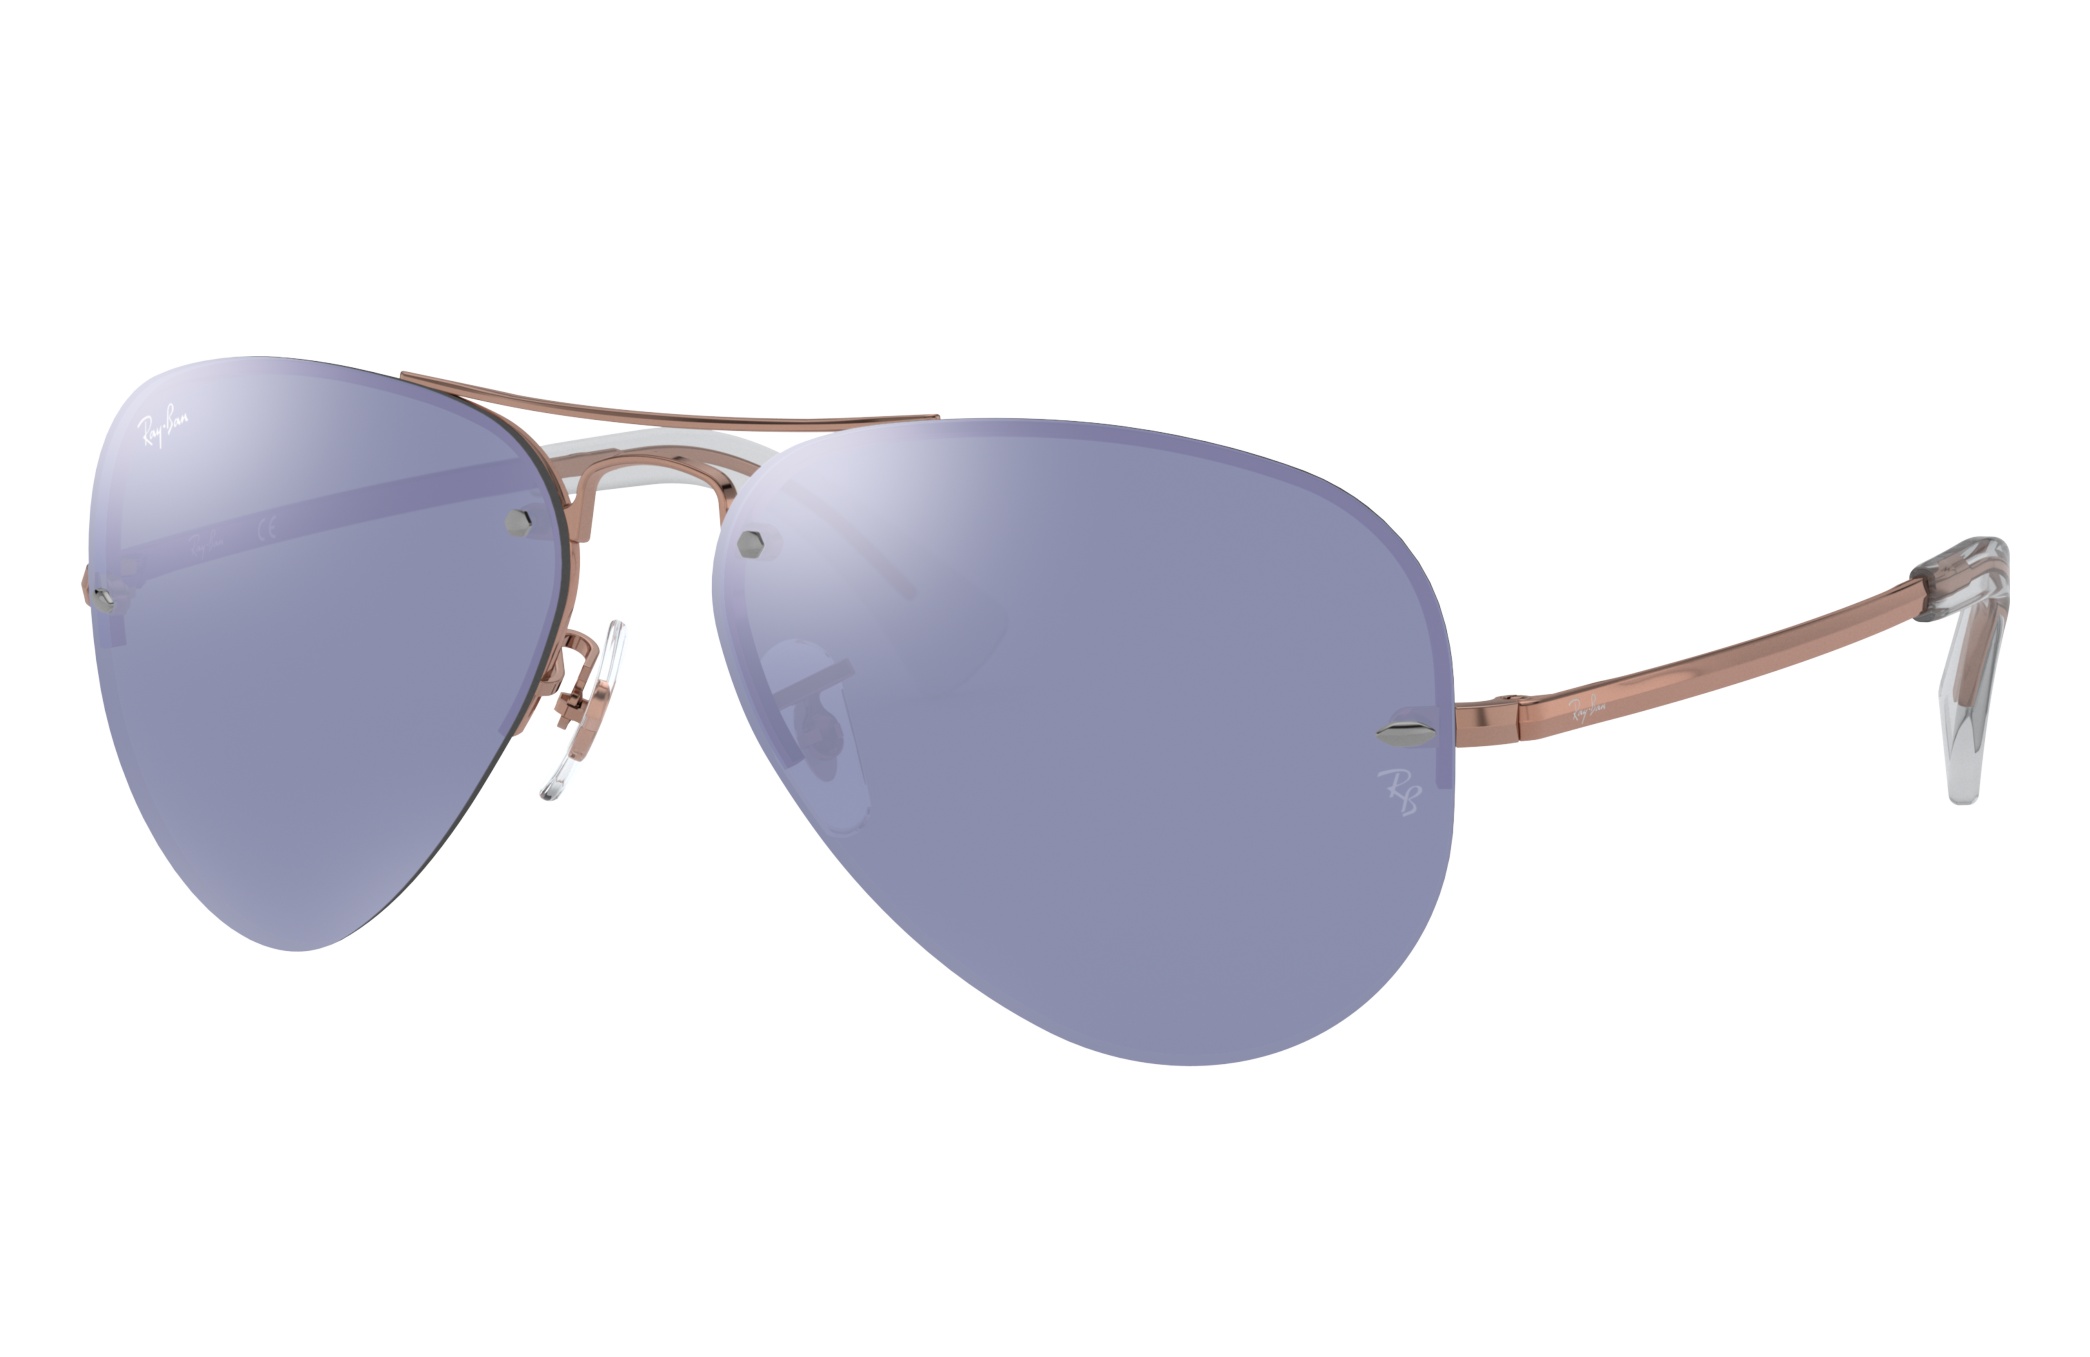 Rb3449 Sunglasses in Bronze-Copper and Violet - RB3449 | Ray-Ban® US